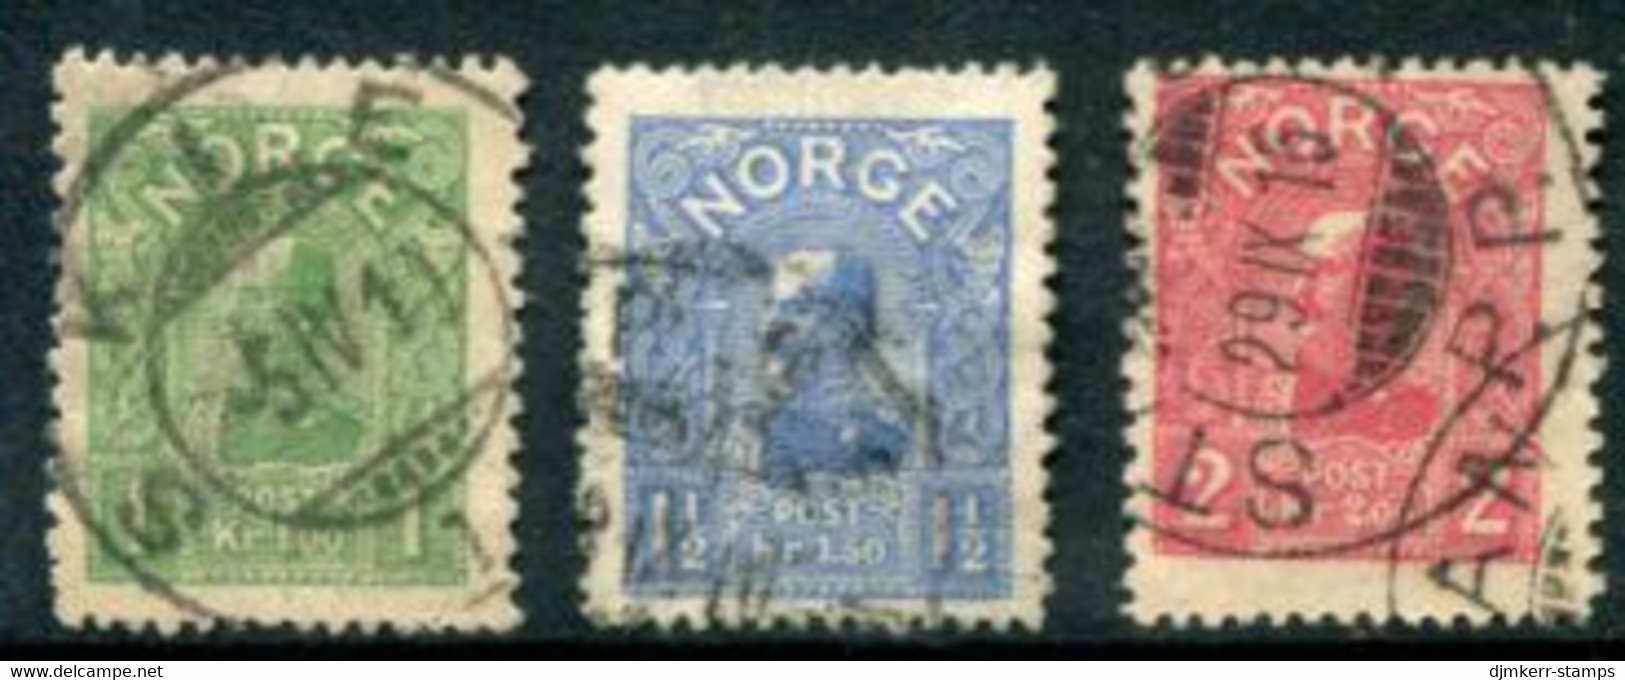 NORWAY 1907 King Haakon VII High Values Used.  Michel 67-69. - Used Stamps